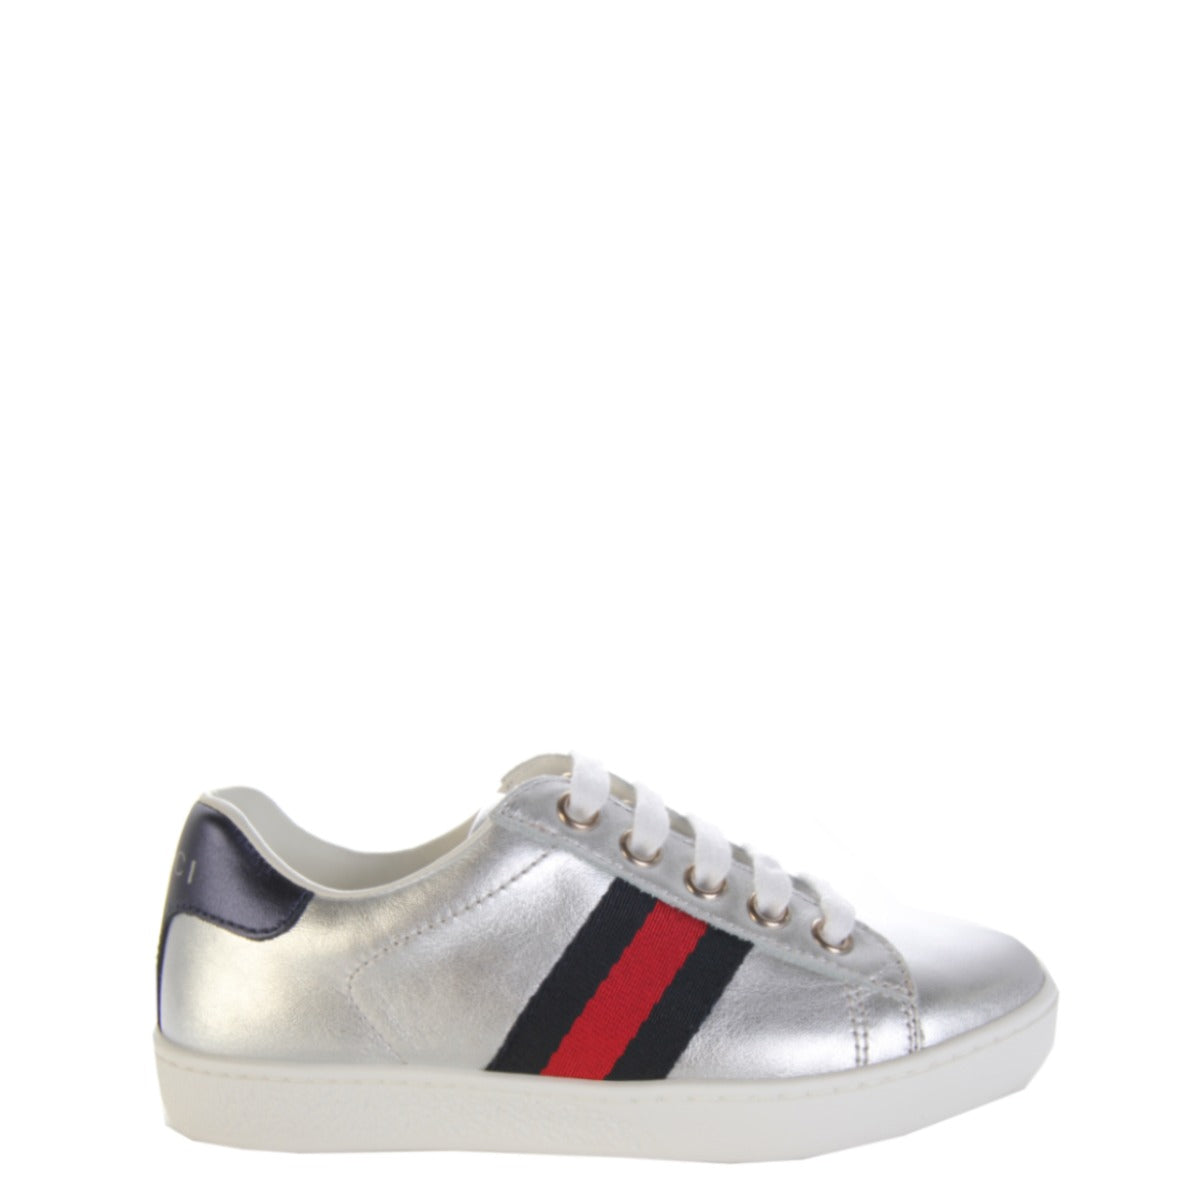 Gucci Kids Ace Leather Trainers